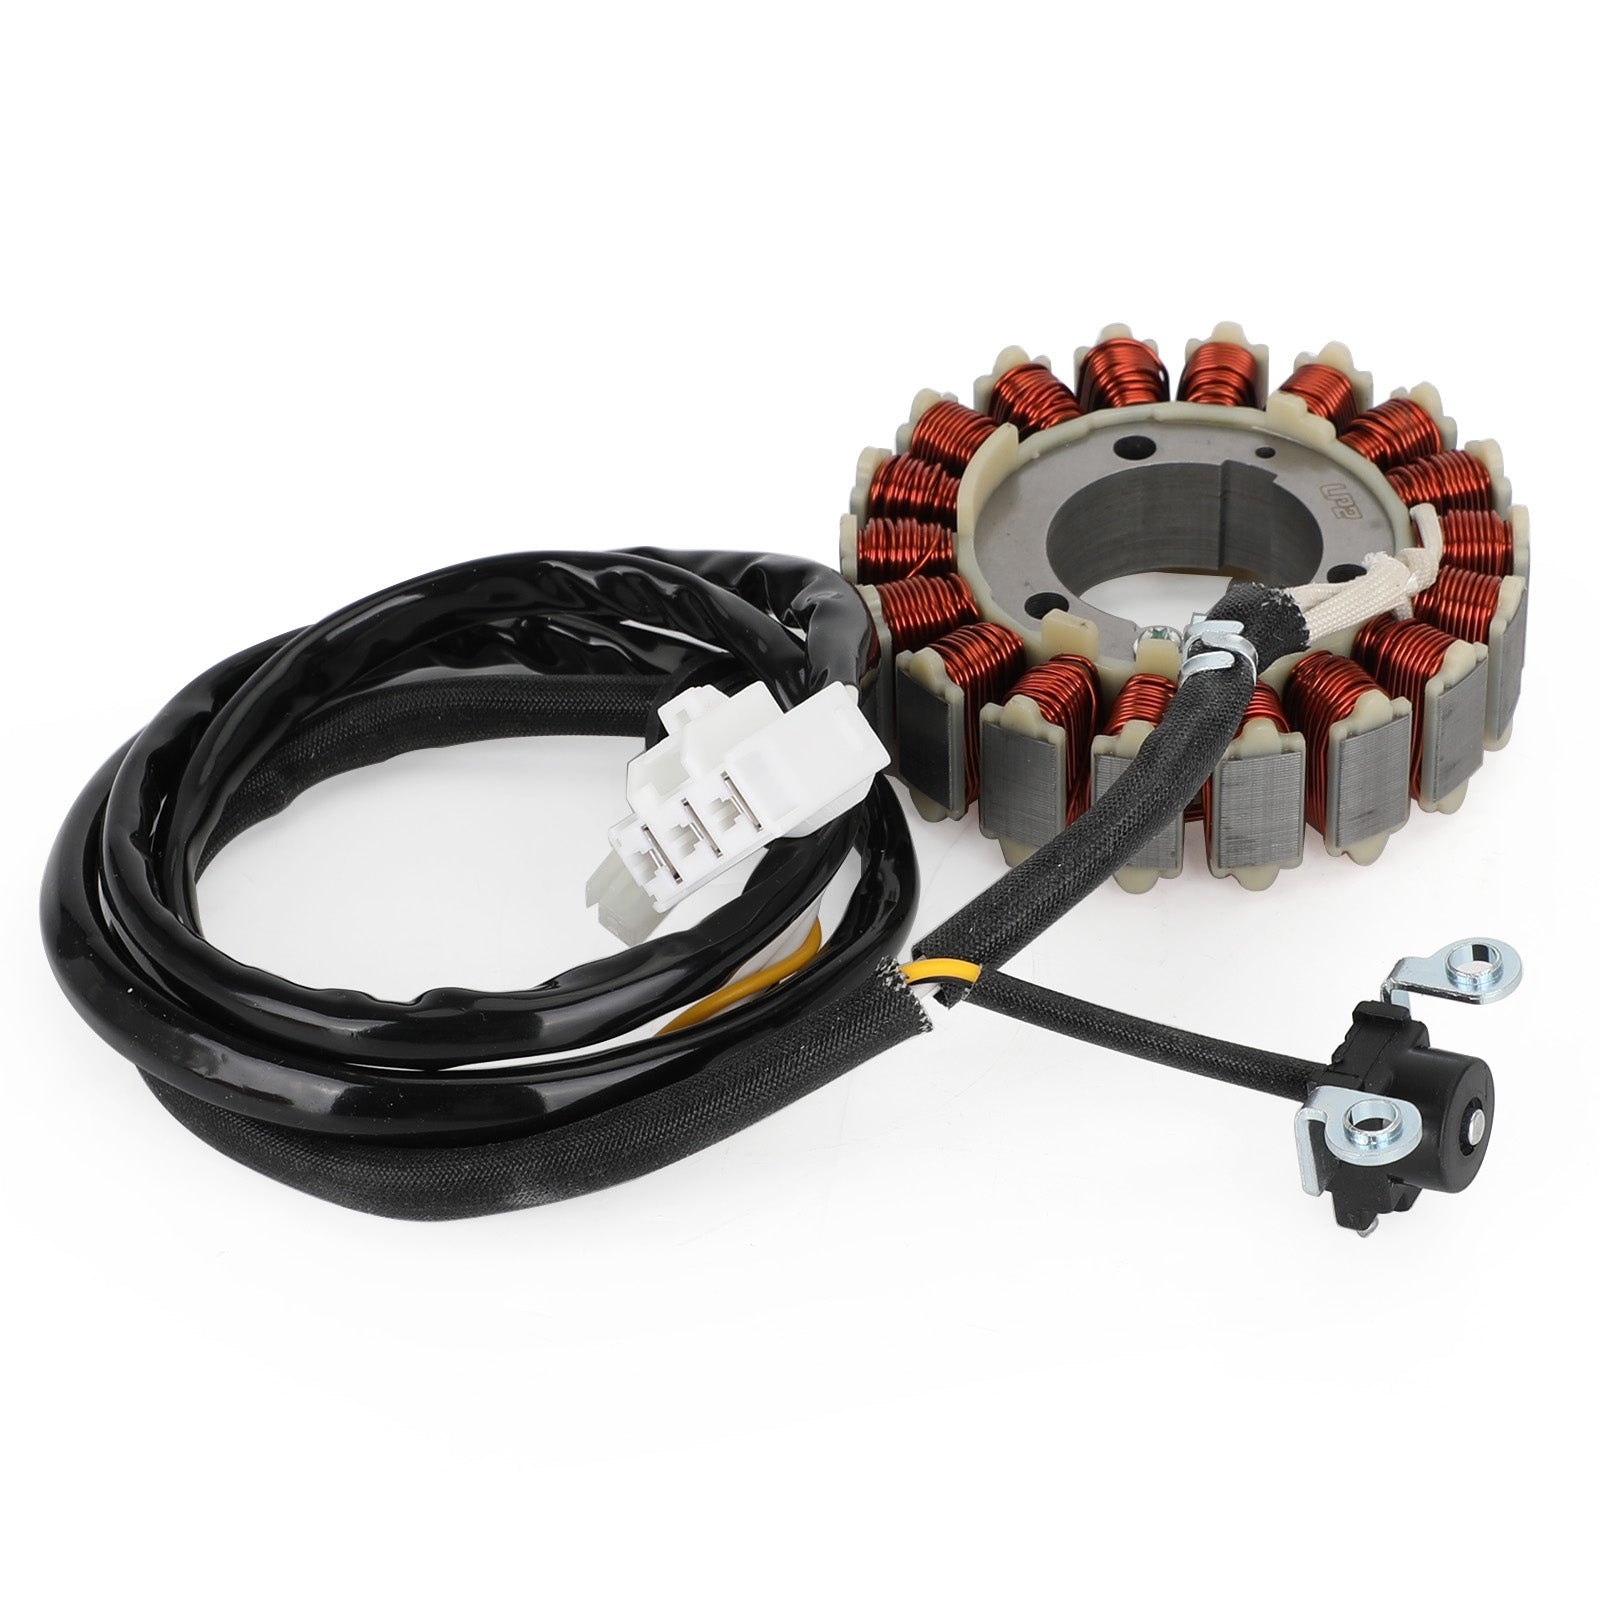 Magneto Generator Stator Fit for Yamaha XP 500 530 560 T-Max Tmax DX SX 2012-2021 Generic